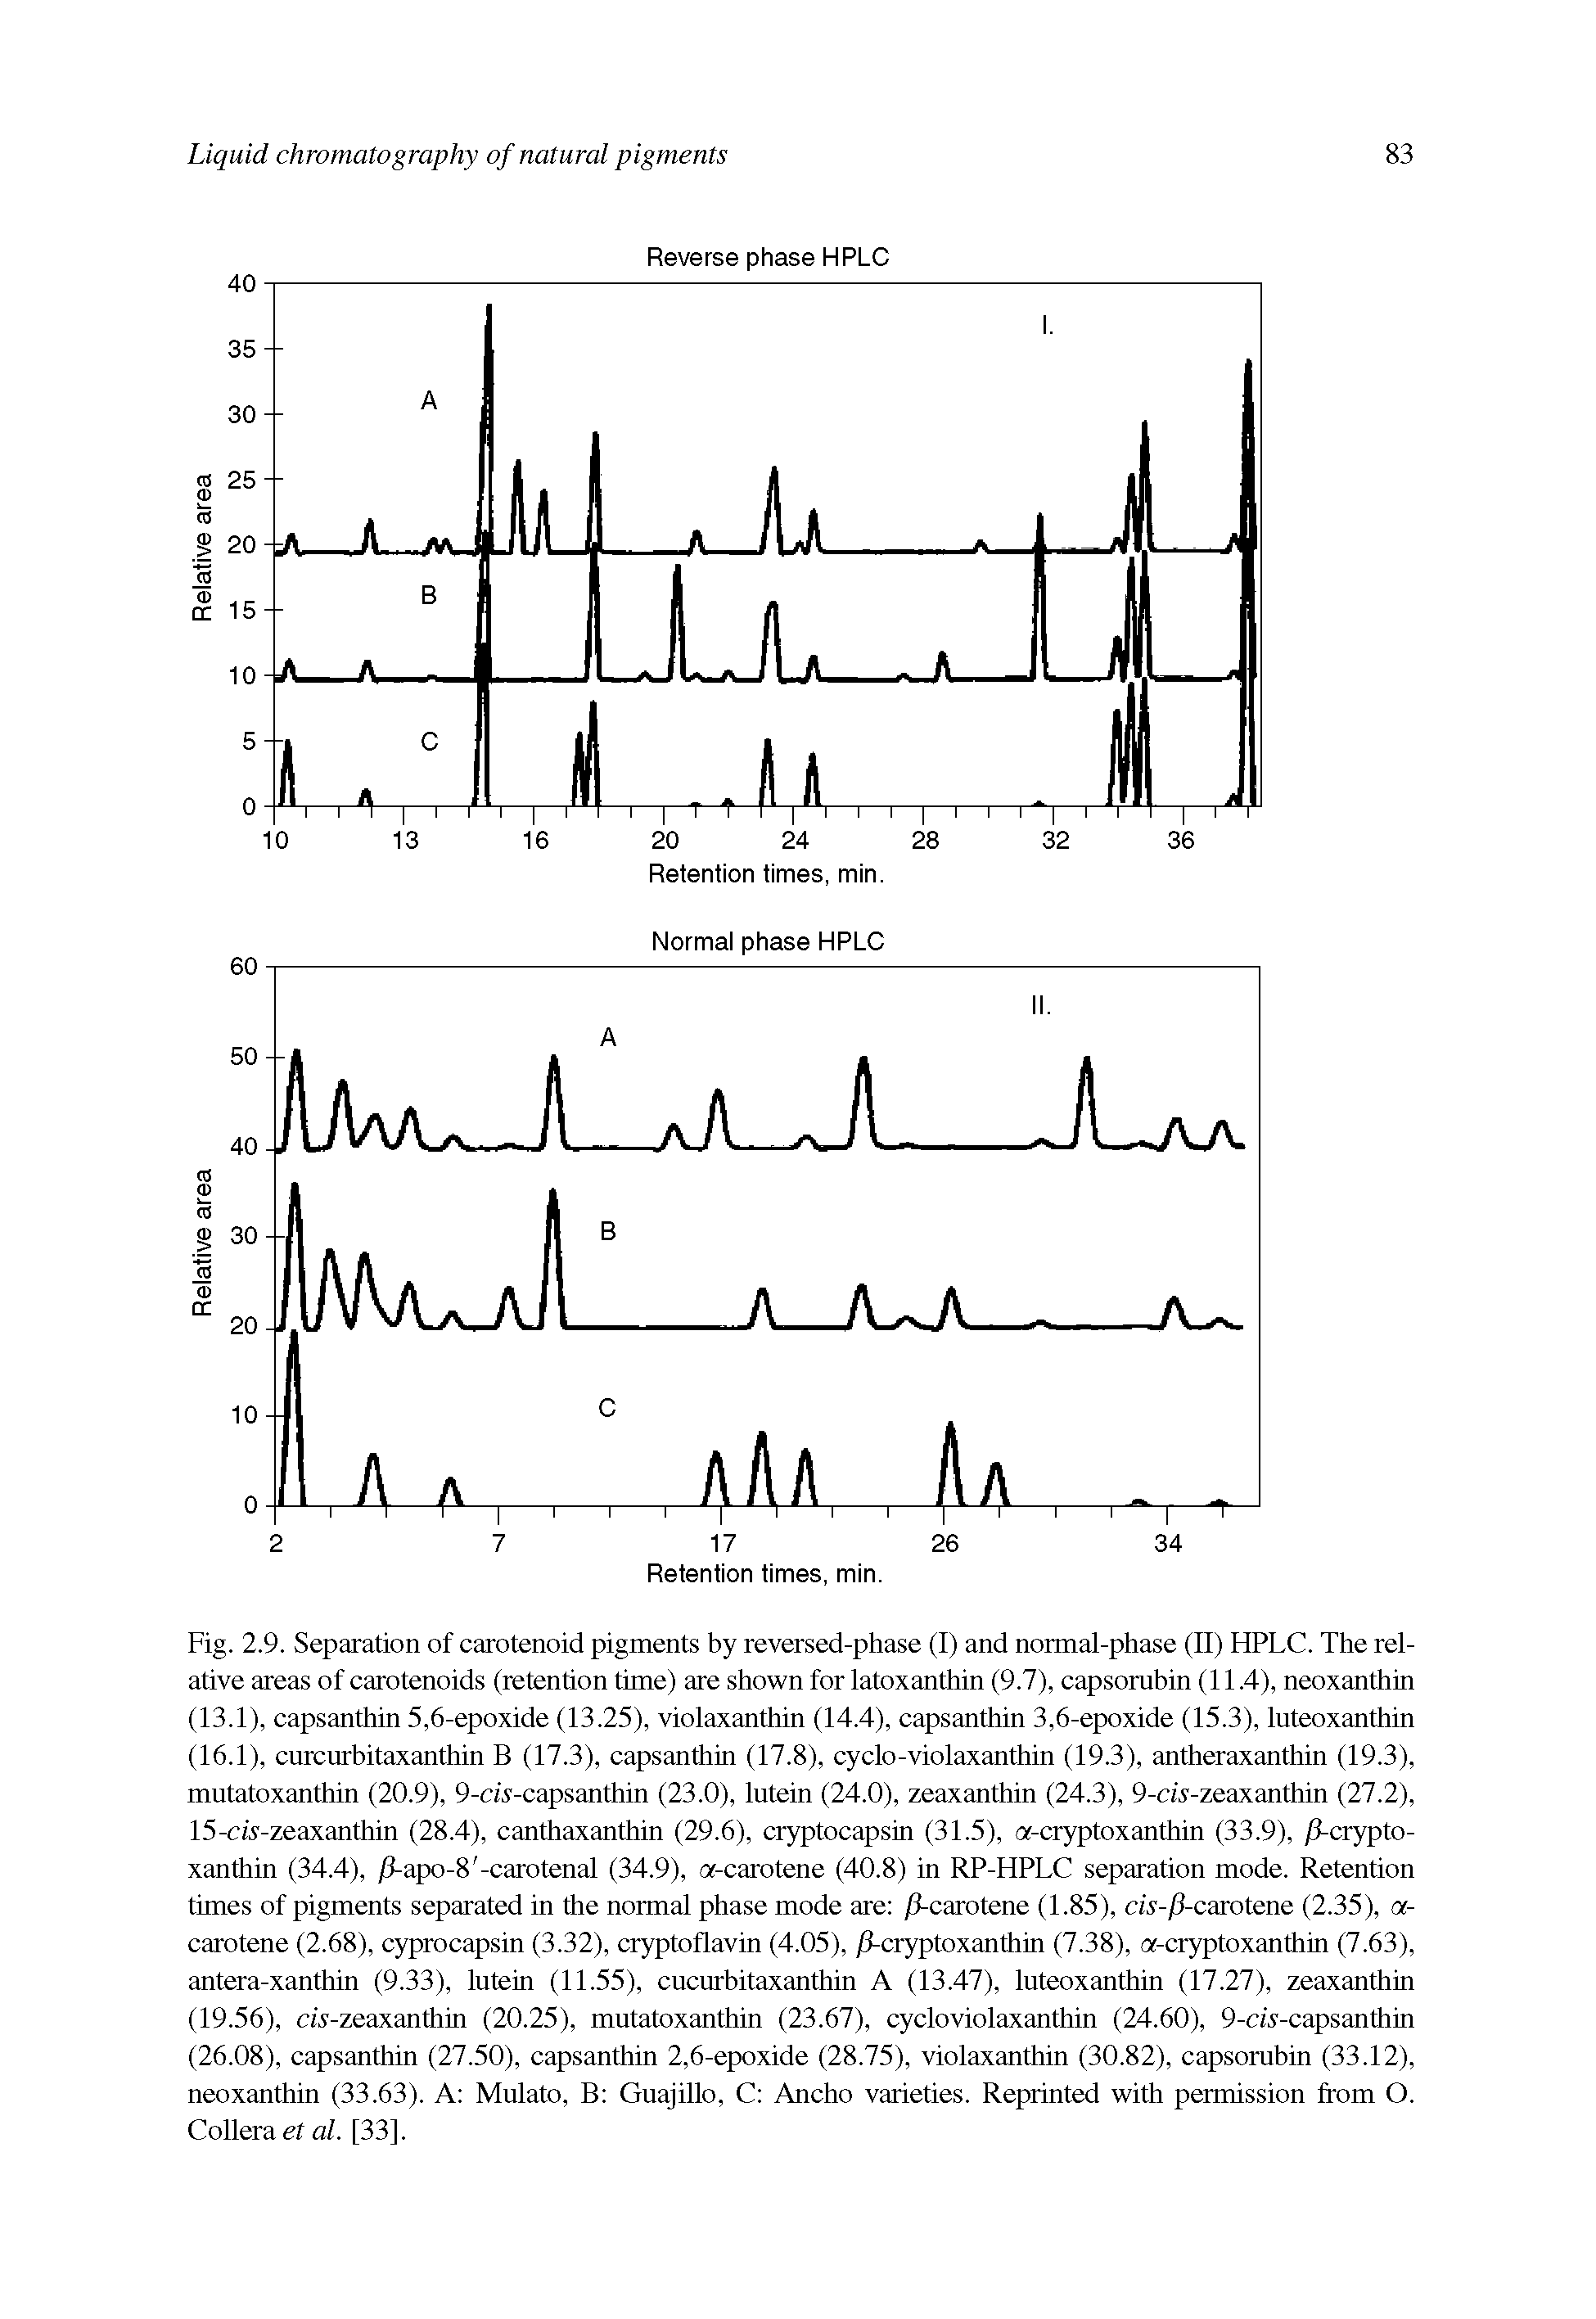 Fig. 2.9. Separation of carotenoid pigments by reversed-phase (I) and normal-phase (II) HPLC. The relative areas of carotenoids (retention time) are shown for latoxanthin (9.7), capsorubin (11.4), neoxanthin...